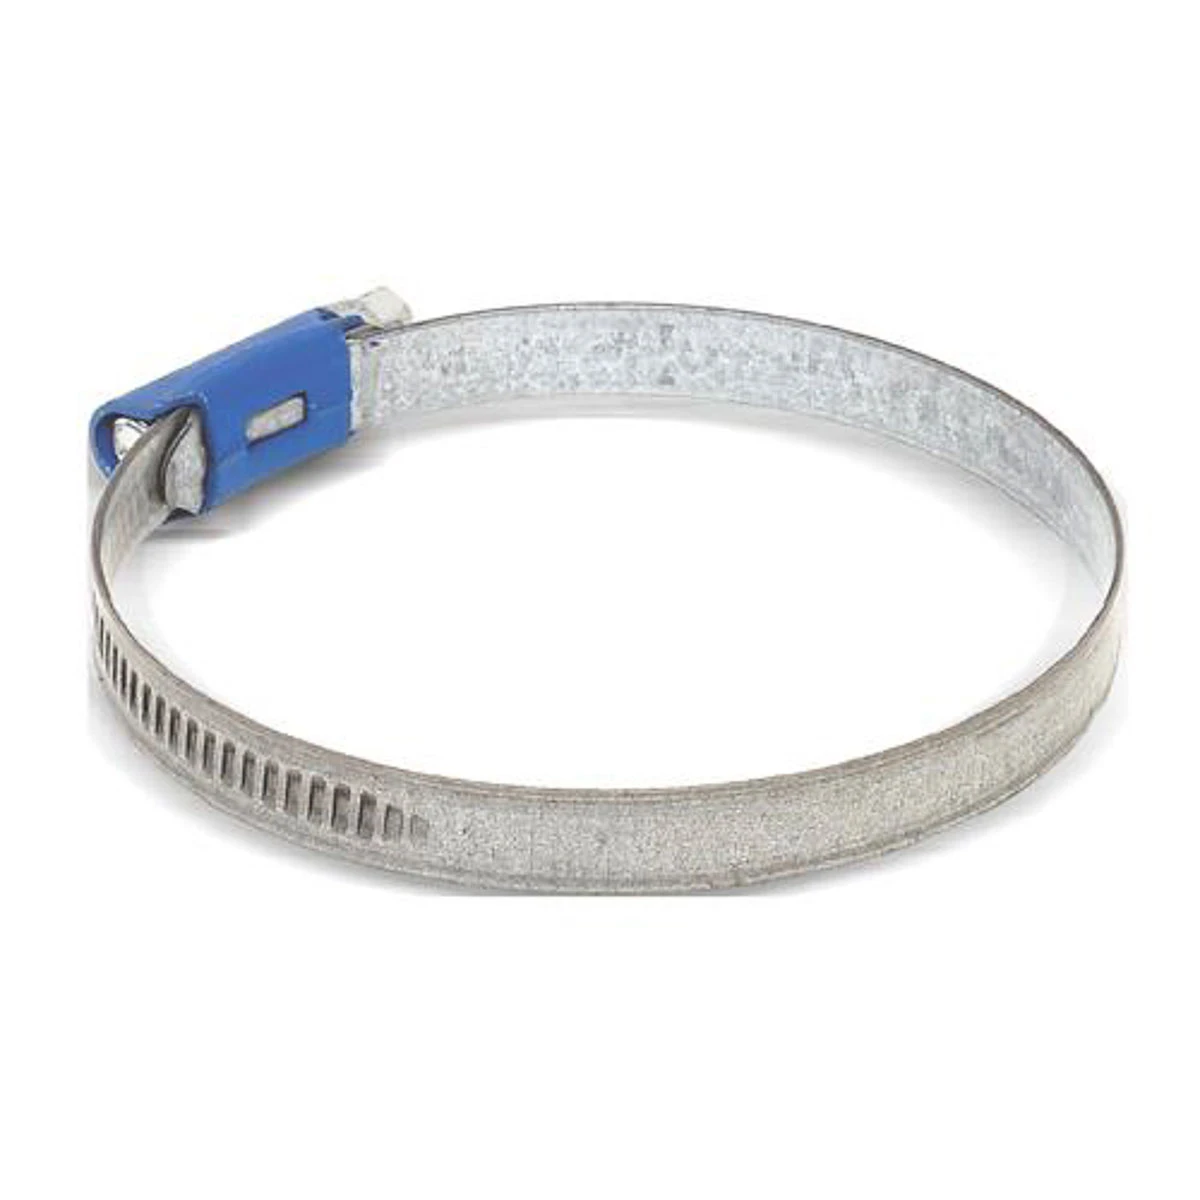 KG Airbox Hose Clamp